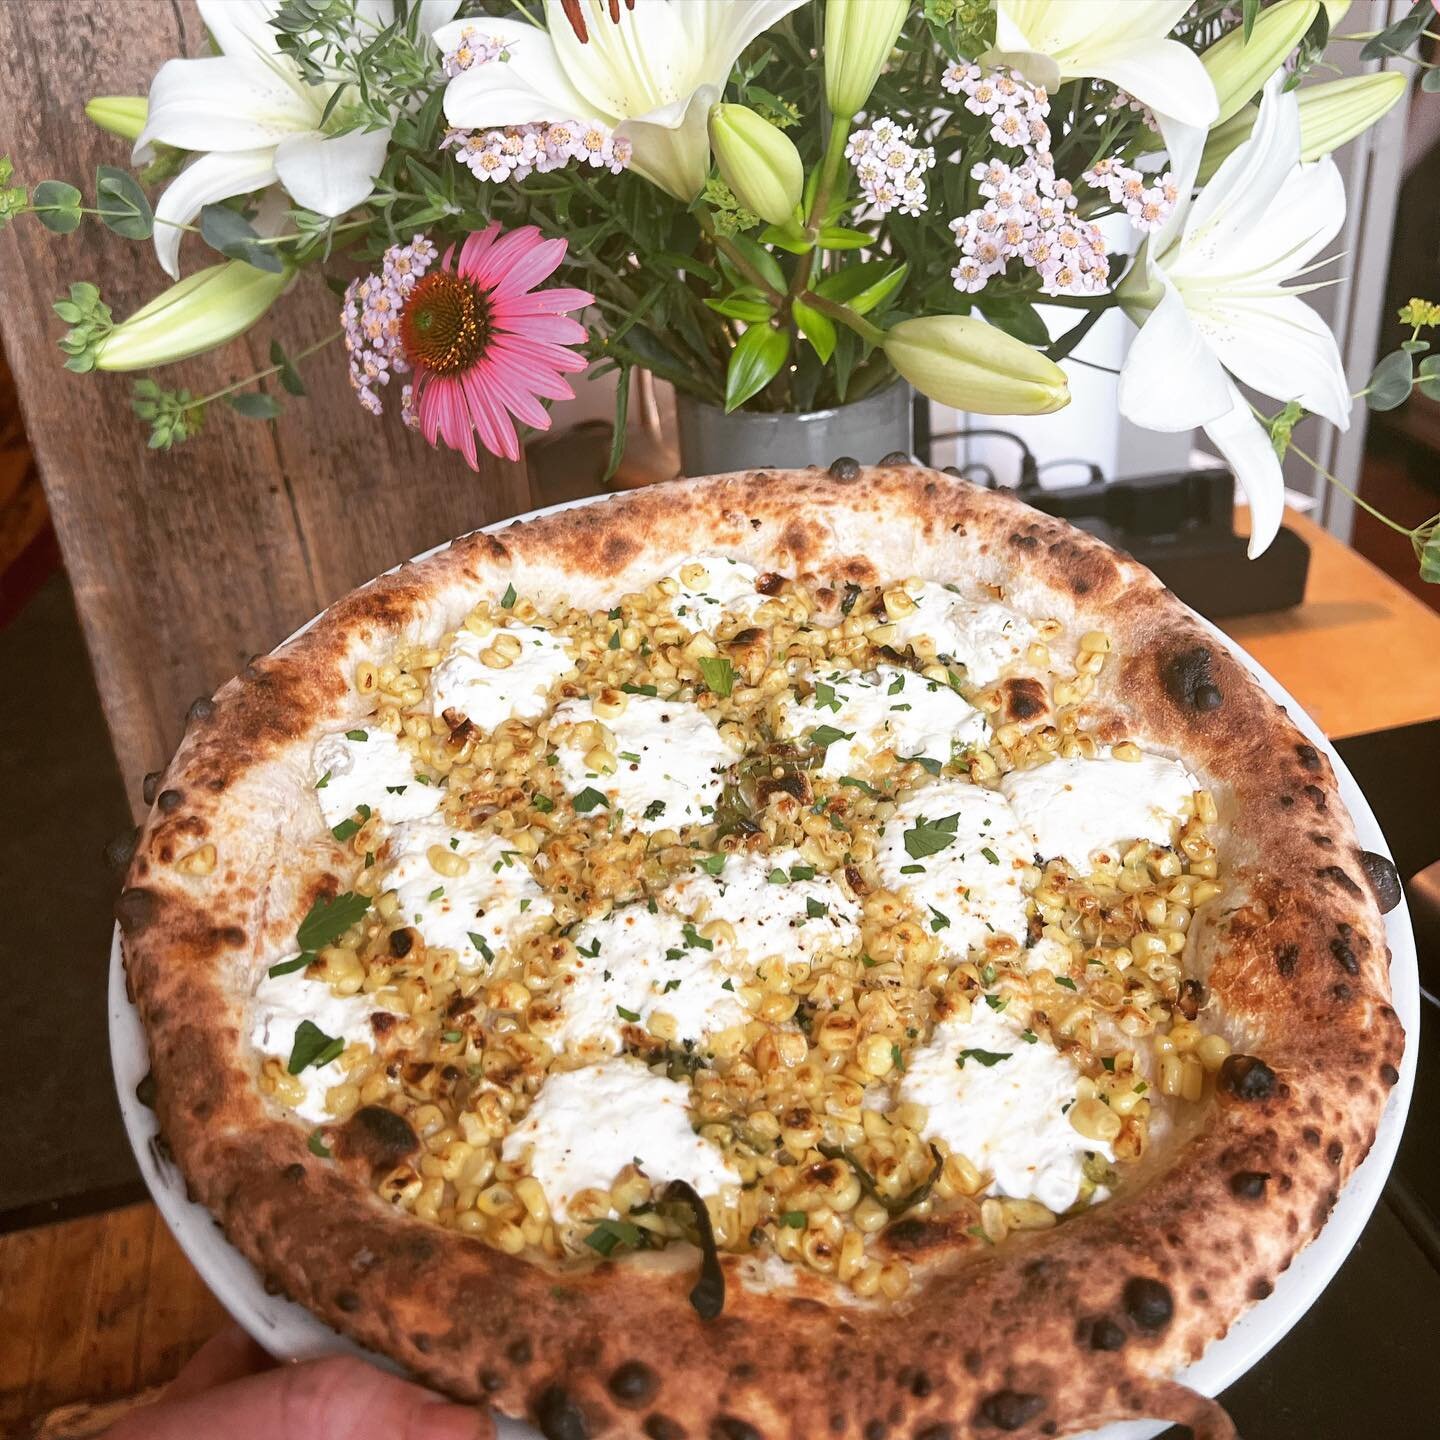 The New Jersey Corn fairy paid us a visit and brought us some sweet Jersey corn from Kerr&rsquo;s farm stand. Come get it while it&rsquo;s available. Made with Serrano peppers, woodfired jersey corn, stracchiatella cheese. 🌽 🌶️ 🧀 🧚&zwj;♀️ 

#corn